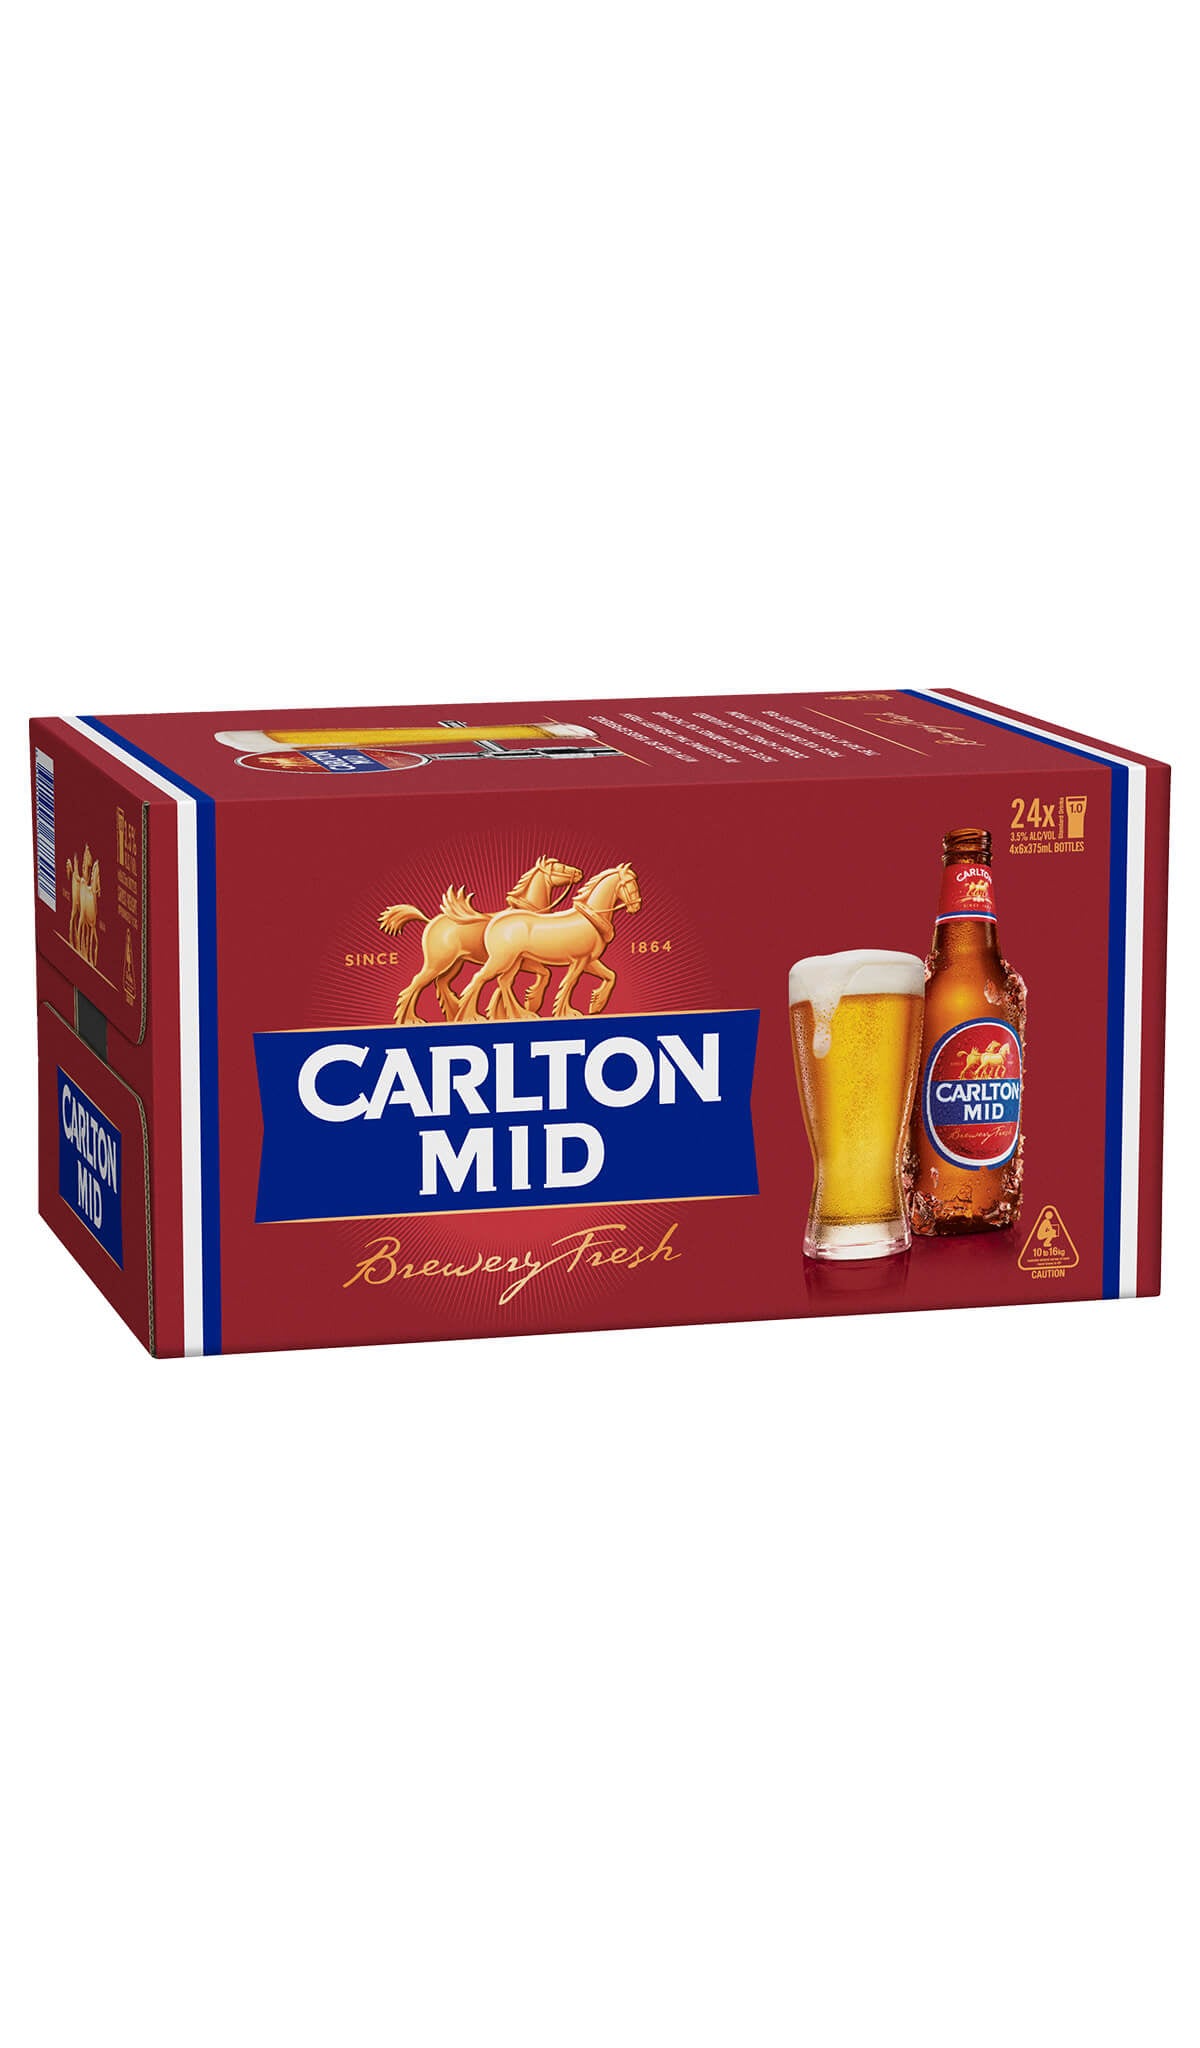 Find out more, explore the range and purchase Carlton Mid 24 x 375mL Bottle Slab beer available at Wine Sellers Direct - Australia's independent liquor specialists.